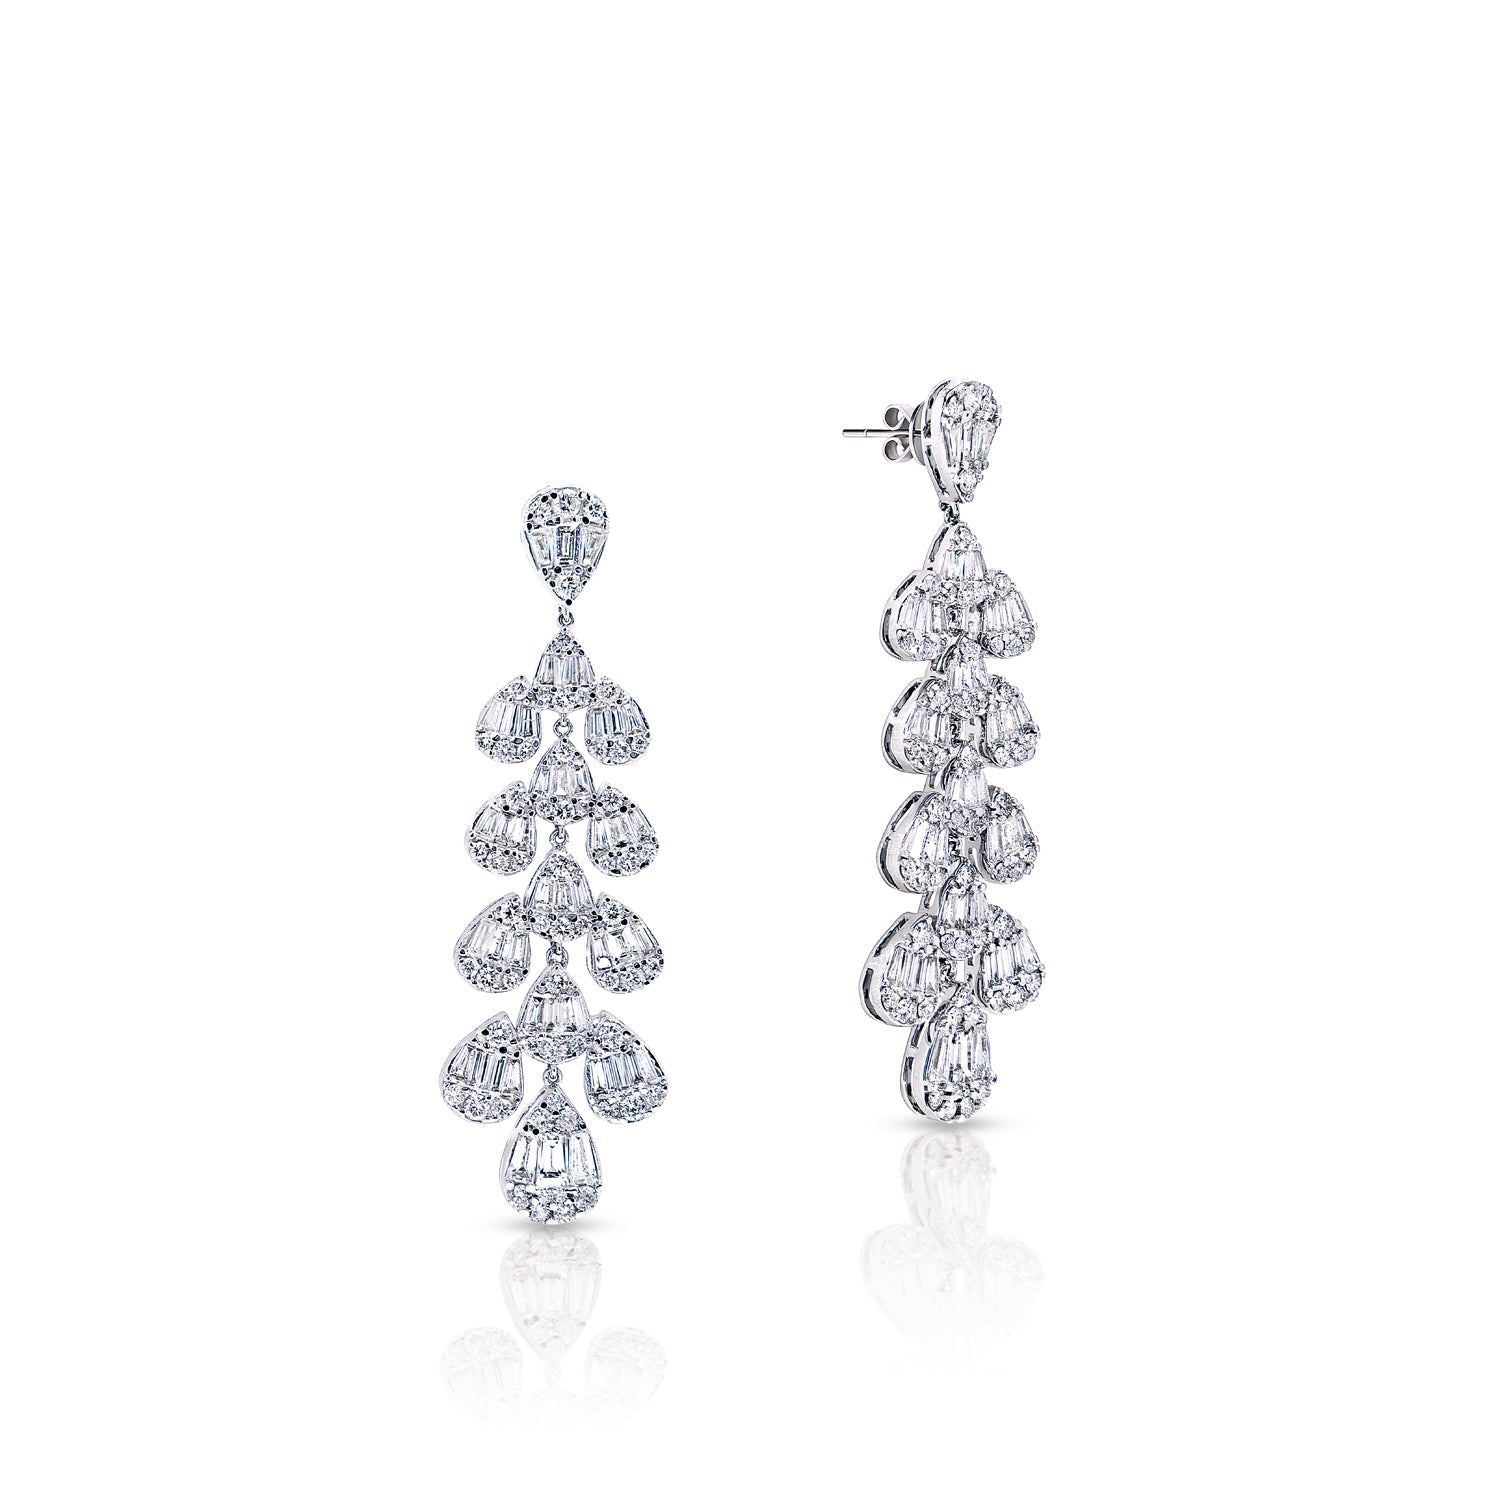 Eloise 6 Carat Baguette and Round Hanging Earth Mined Diamond Earrings in 14 karat White Gold Front and Side View